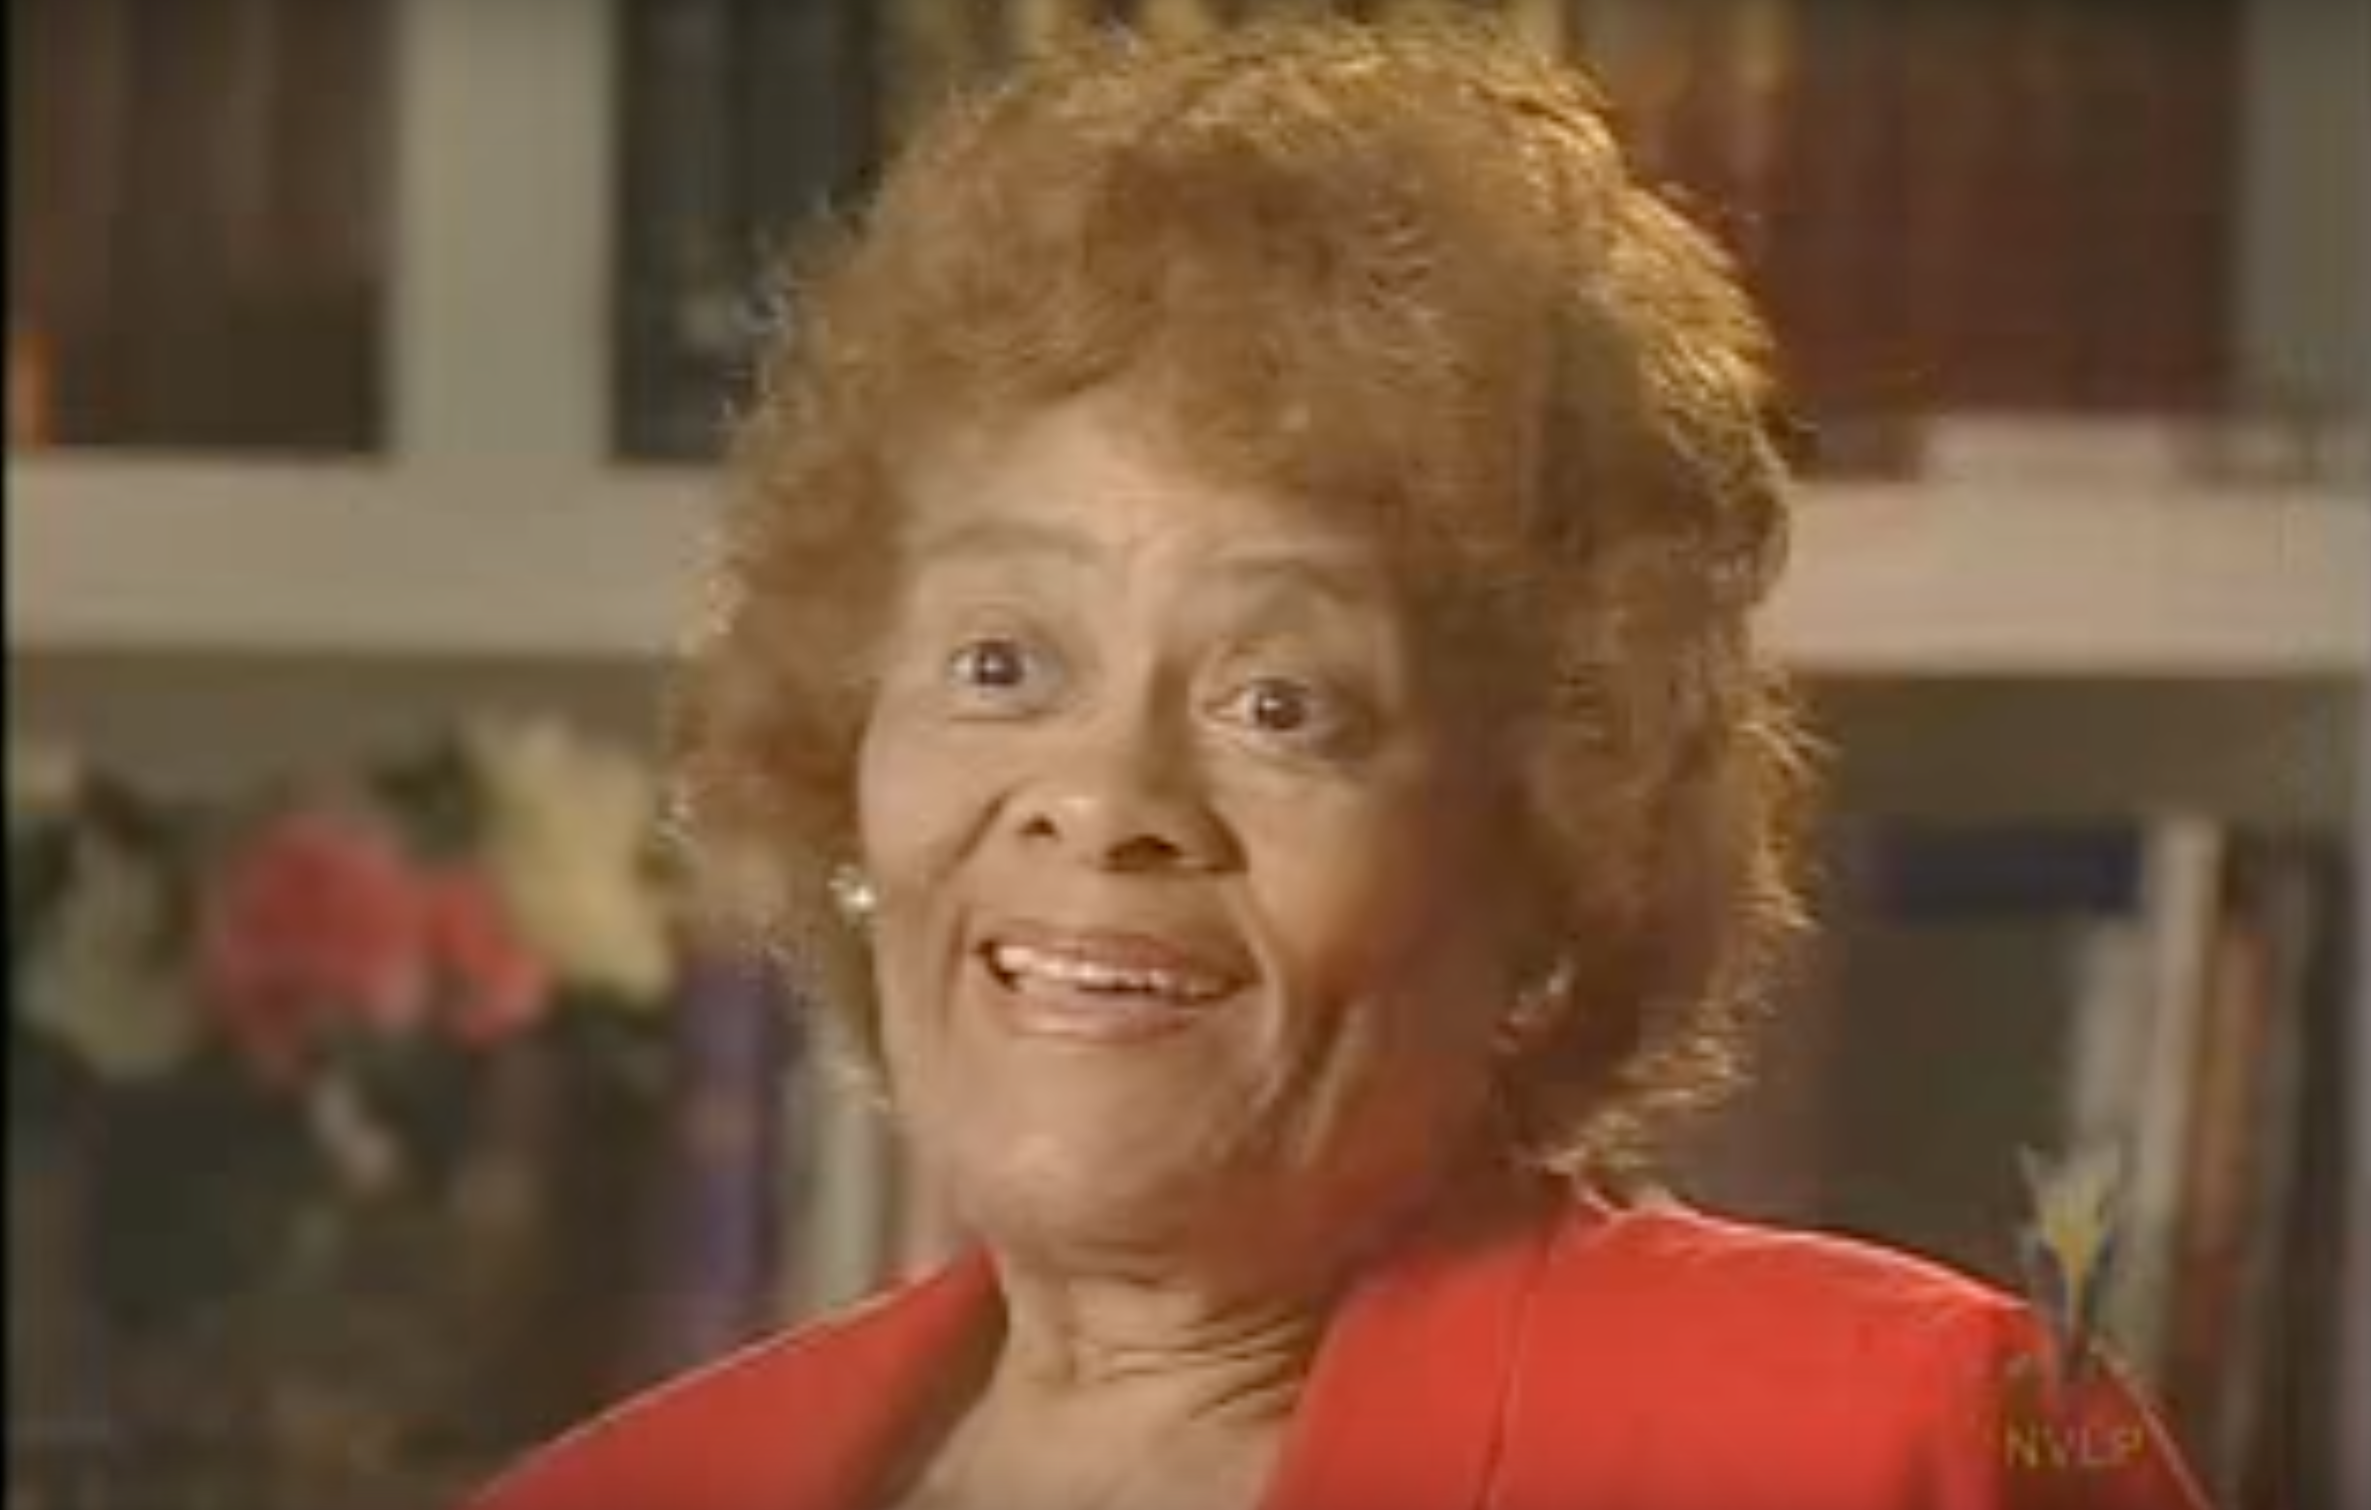 The mathematician Evelyn Boyd Granville speaking during an interview